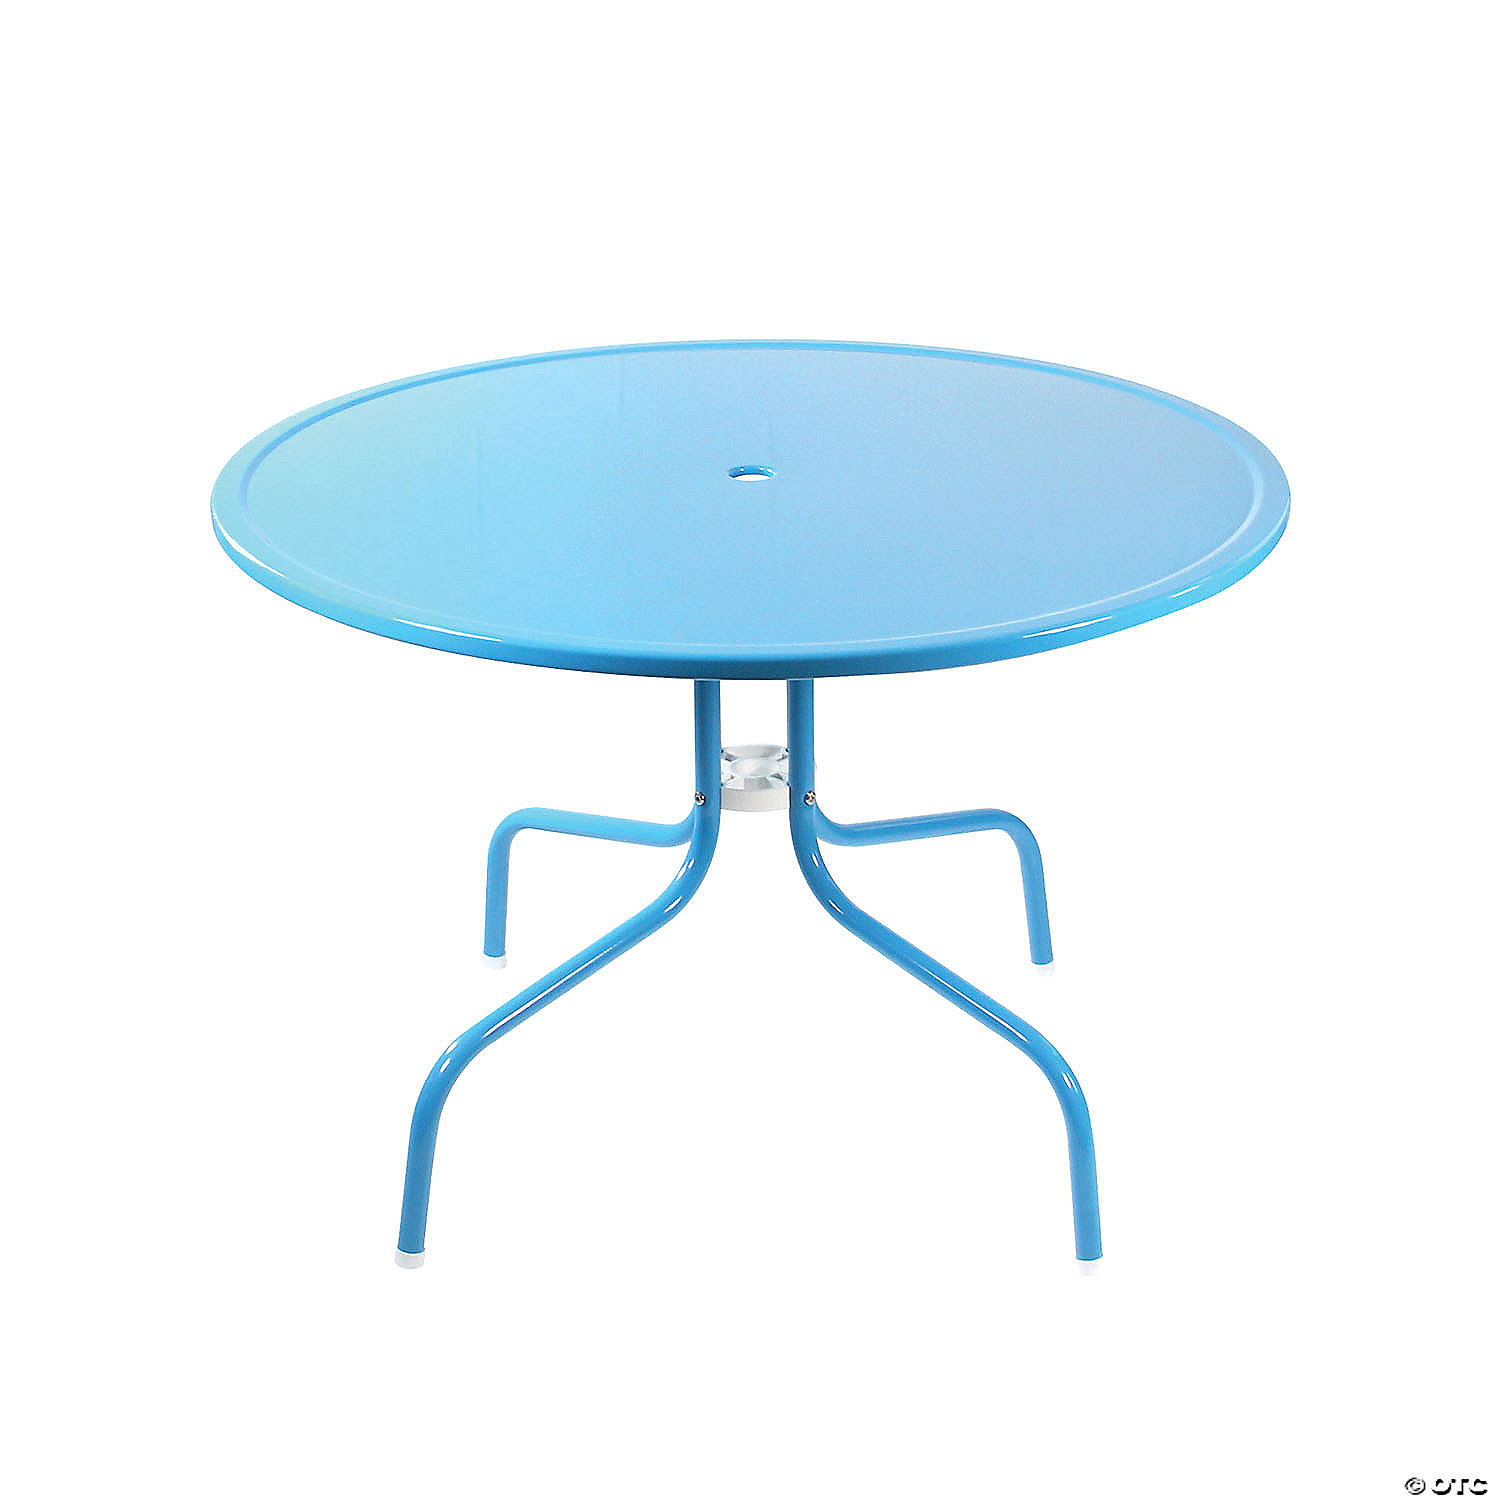 Northlight 39 25 Inch Outdoor Retro, Turquoise Metal Outdoor Table